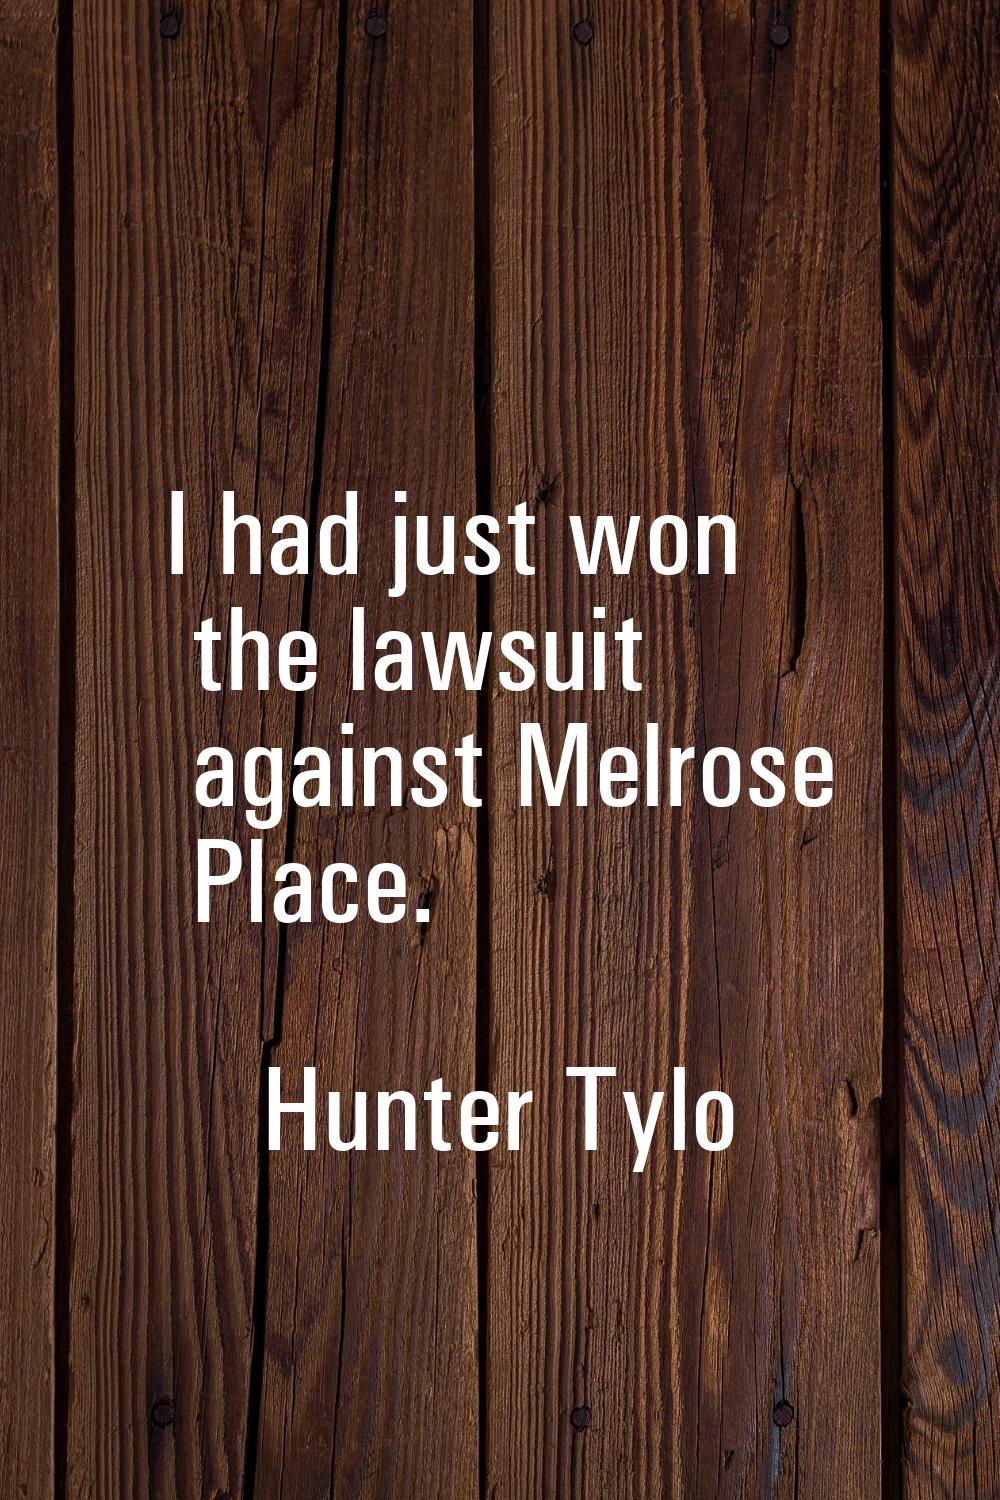 I had just won the lawsuit against Melrose Place.